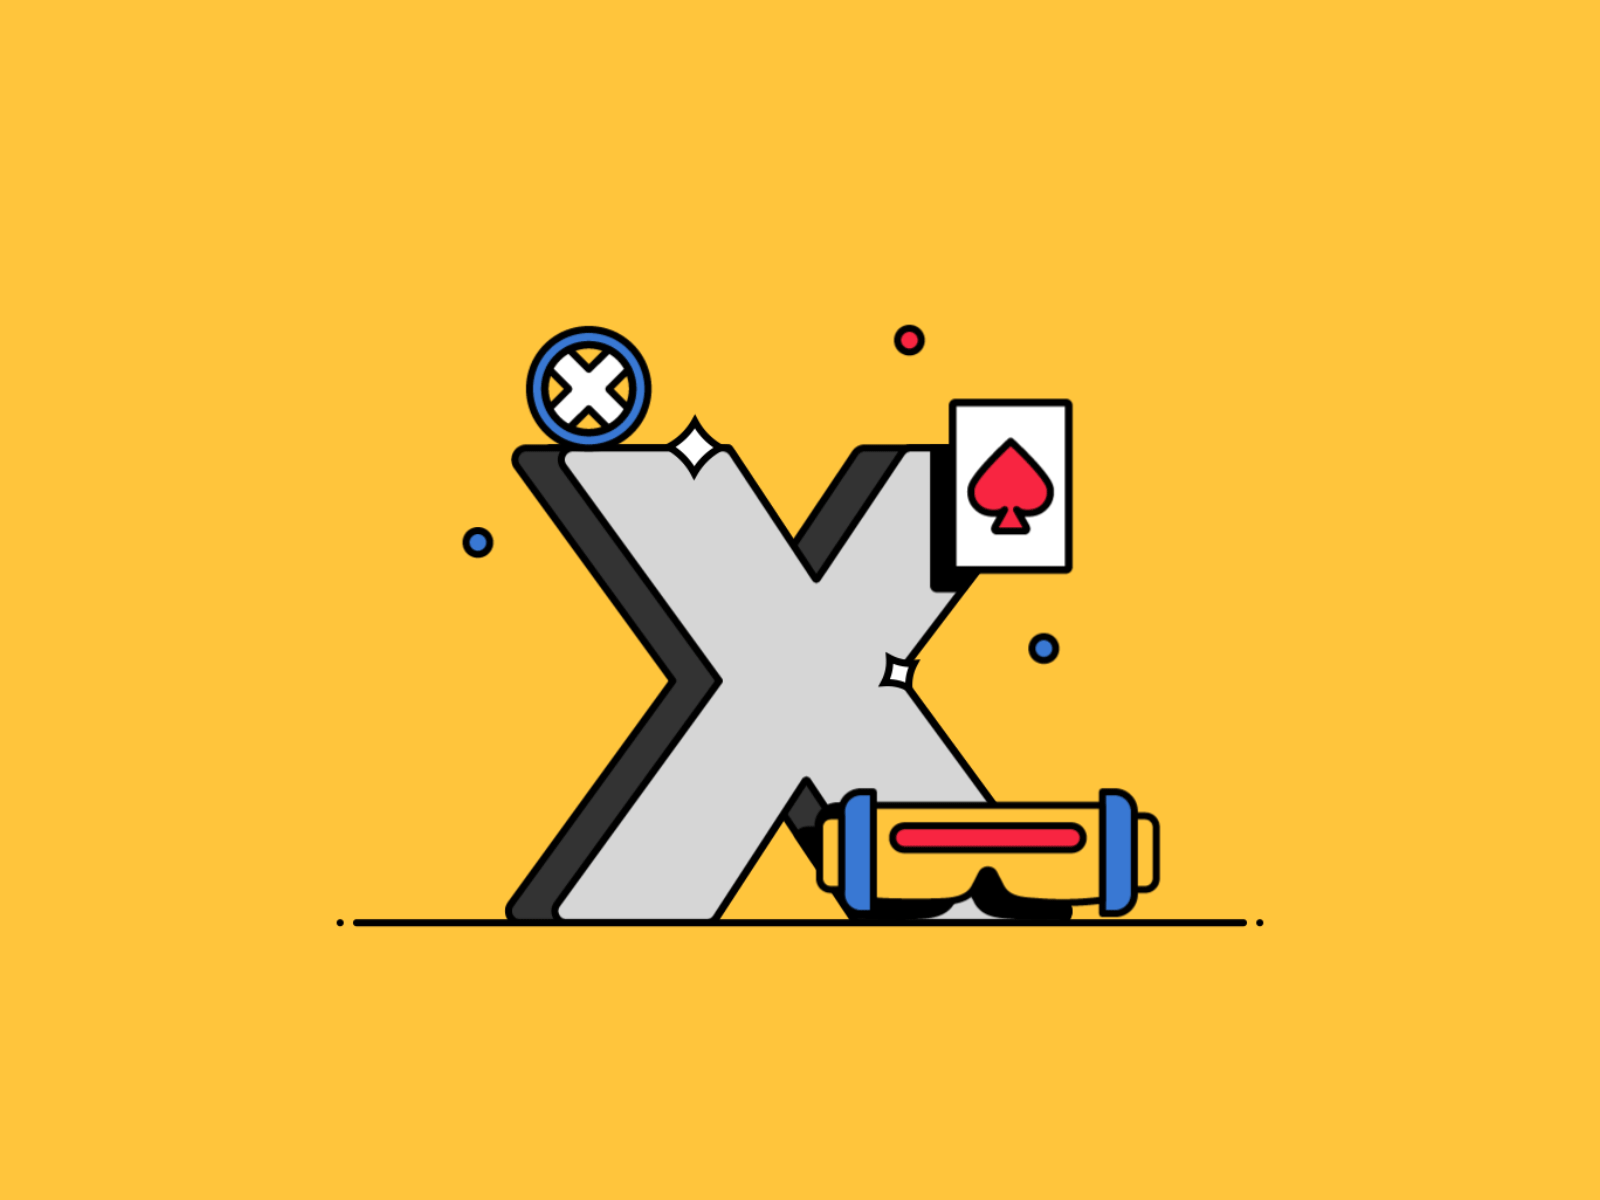 X is for X-Men 🧬 ⚔️ 👁